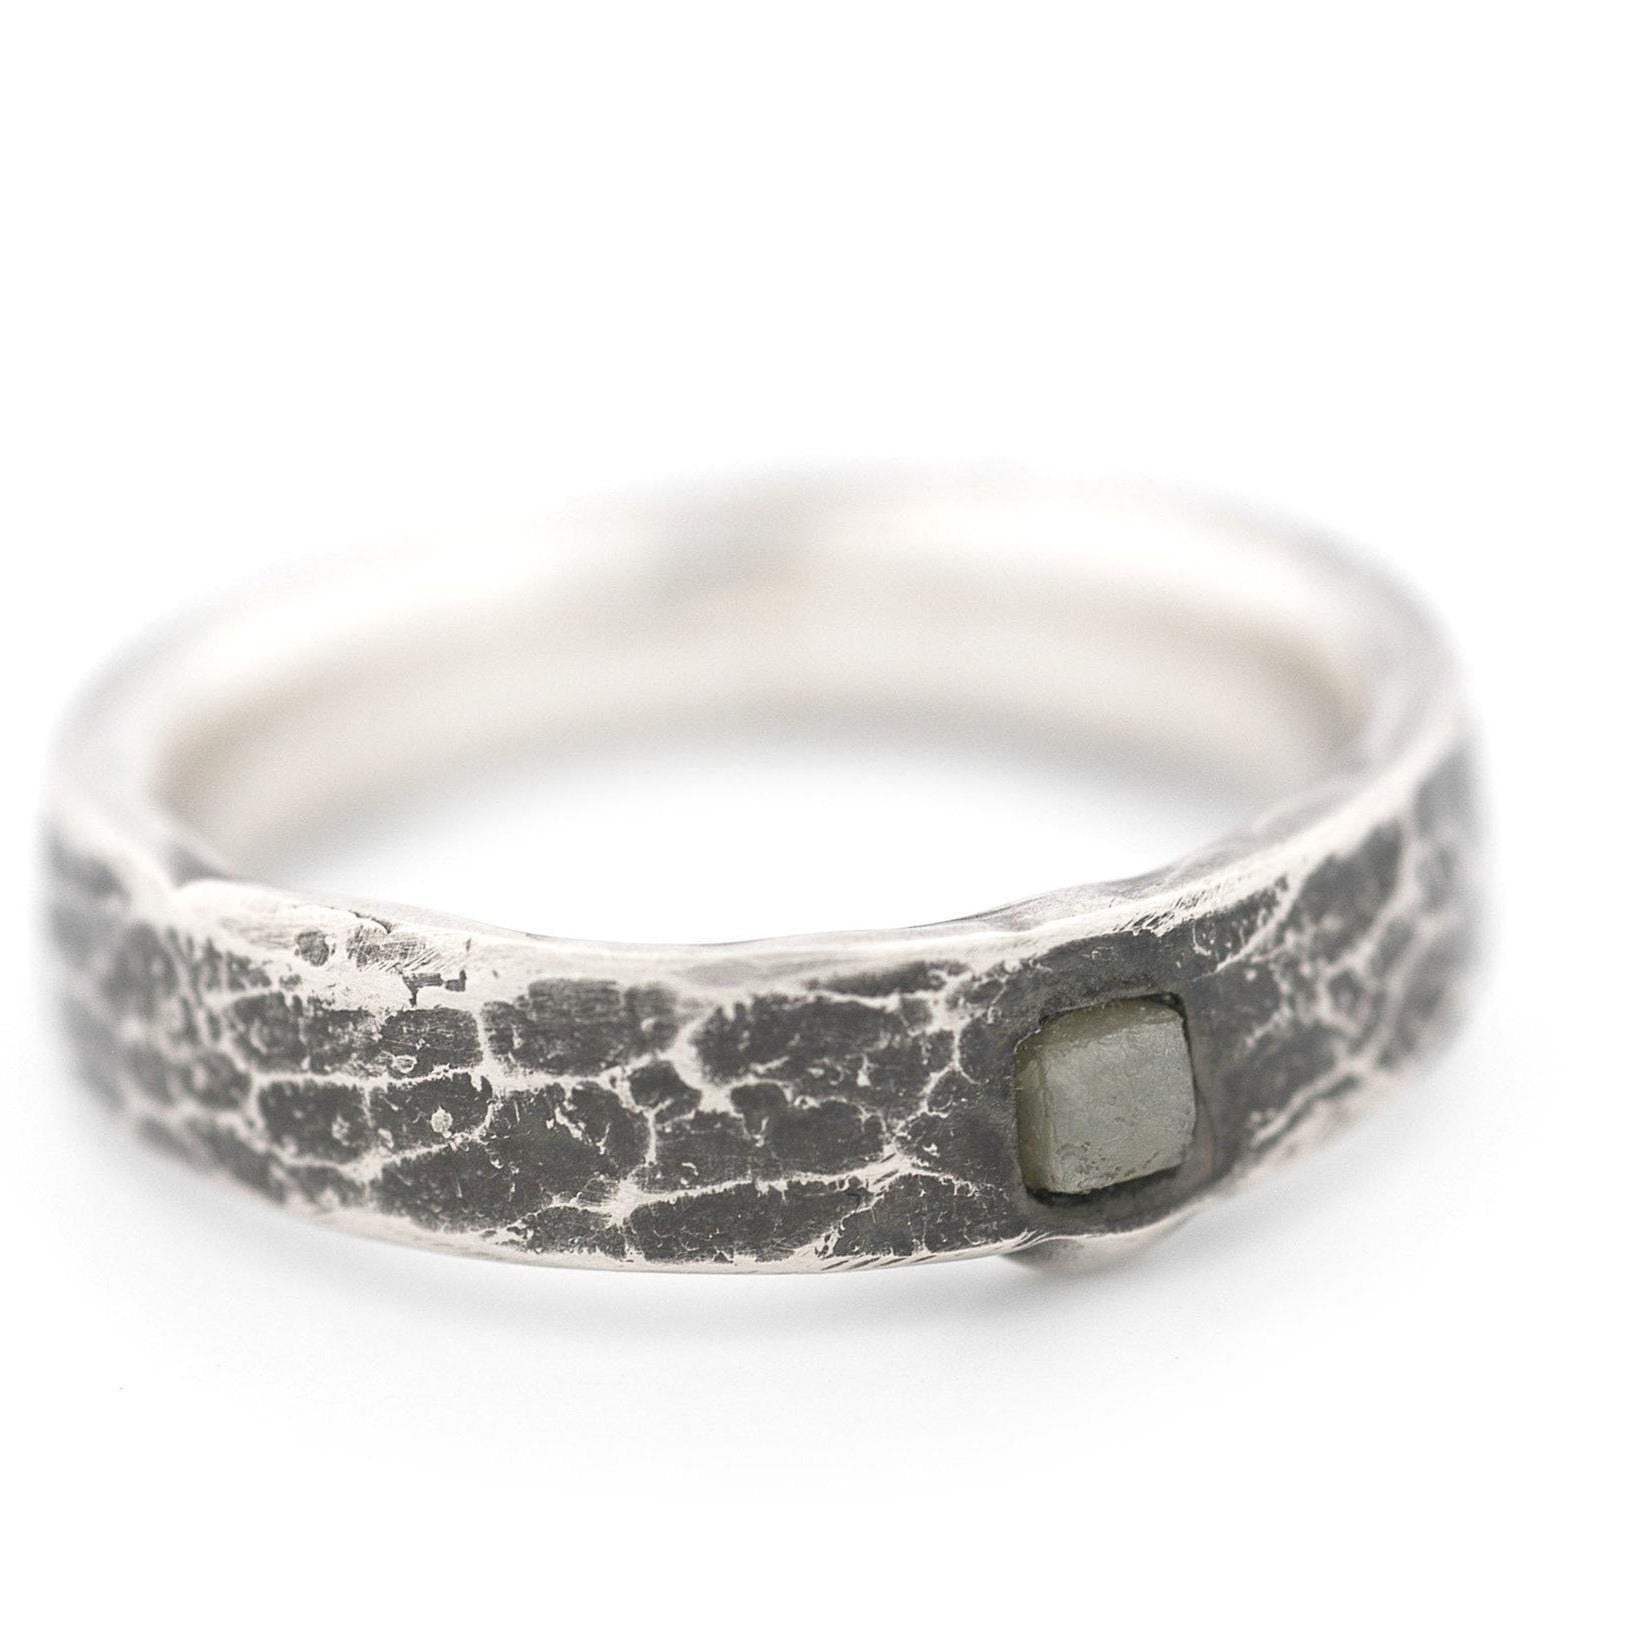 Silver Ring with Raw Diamond